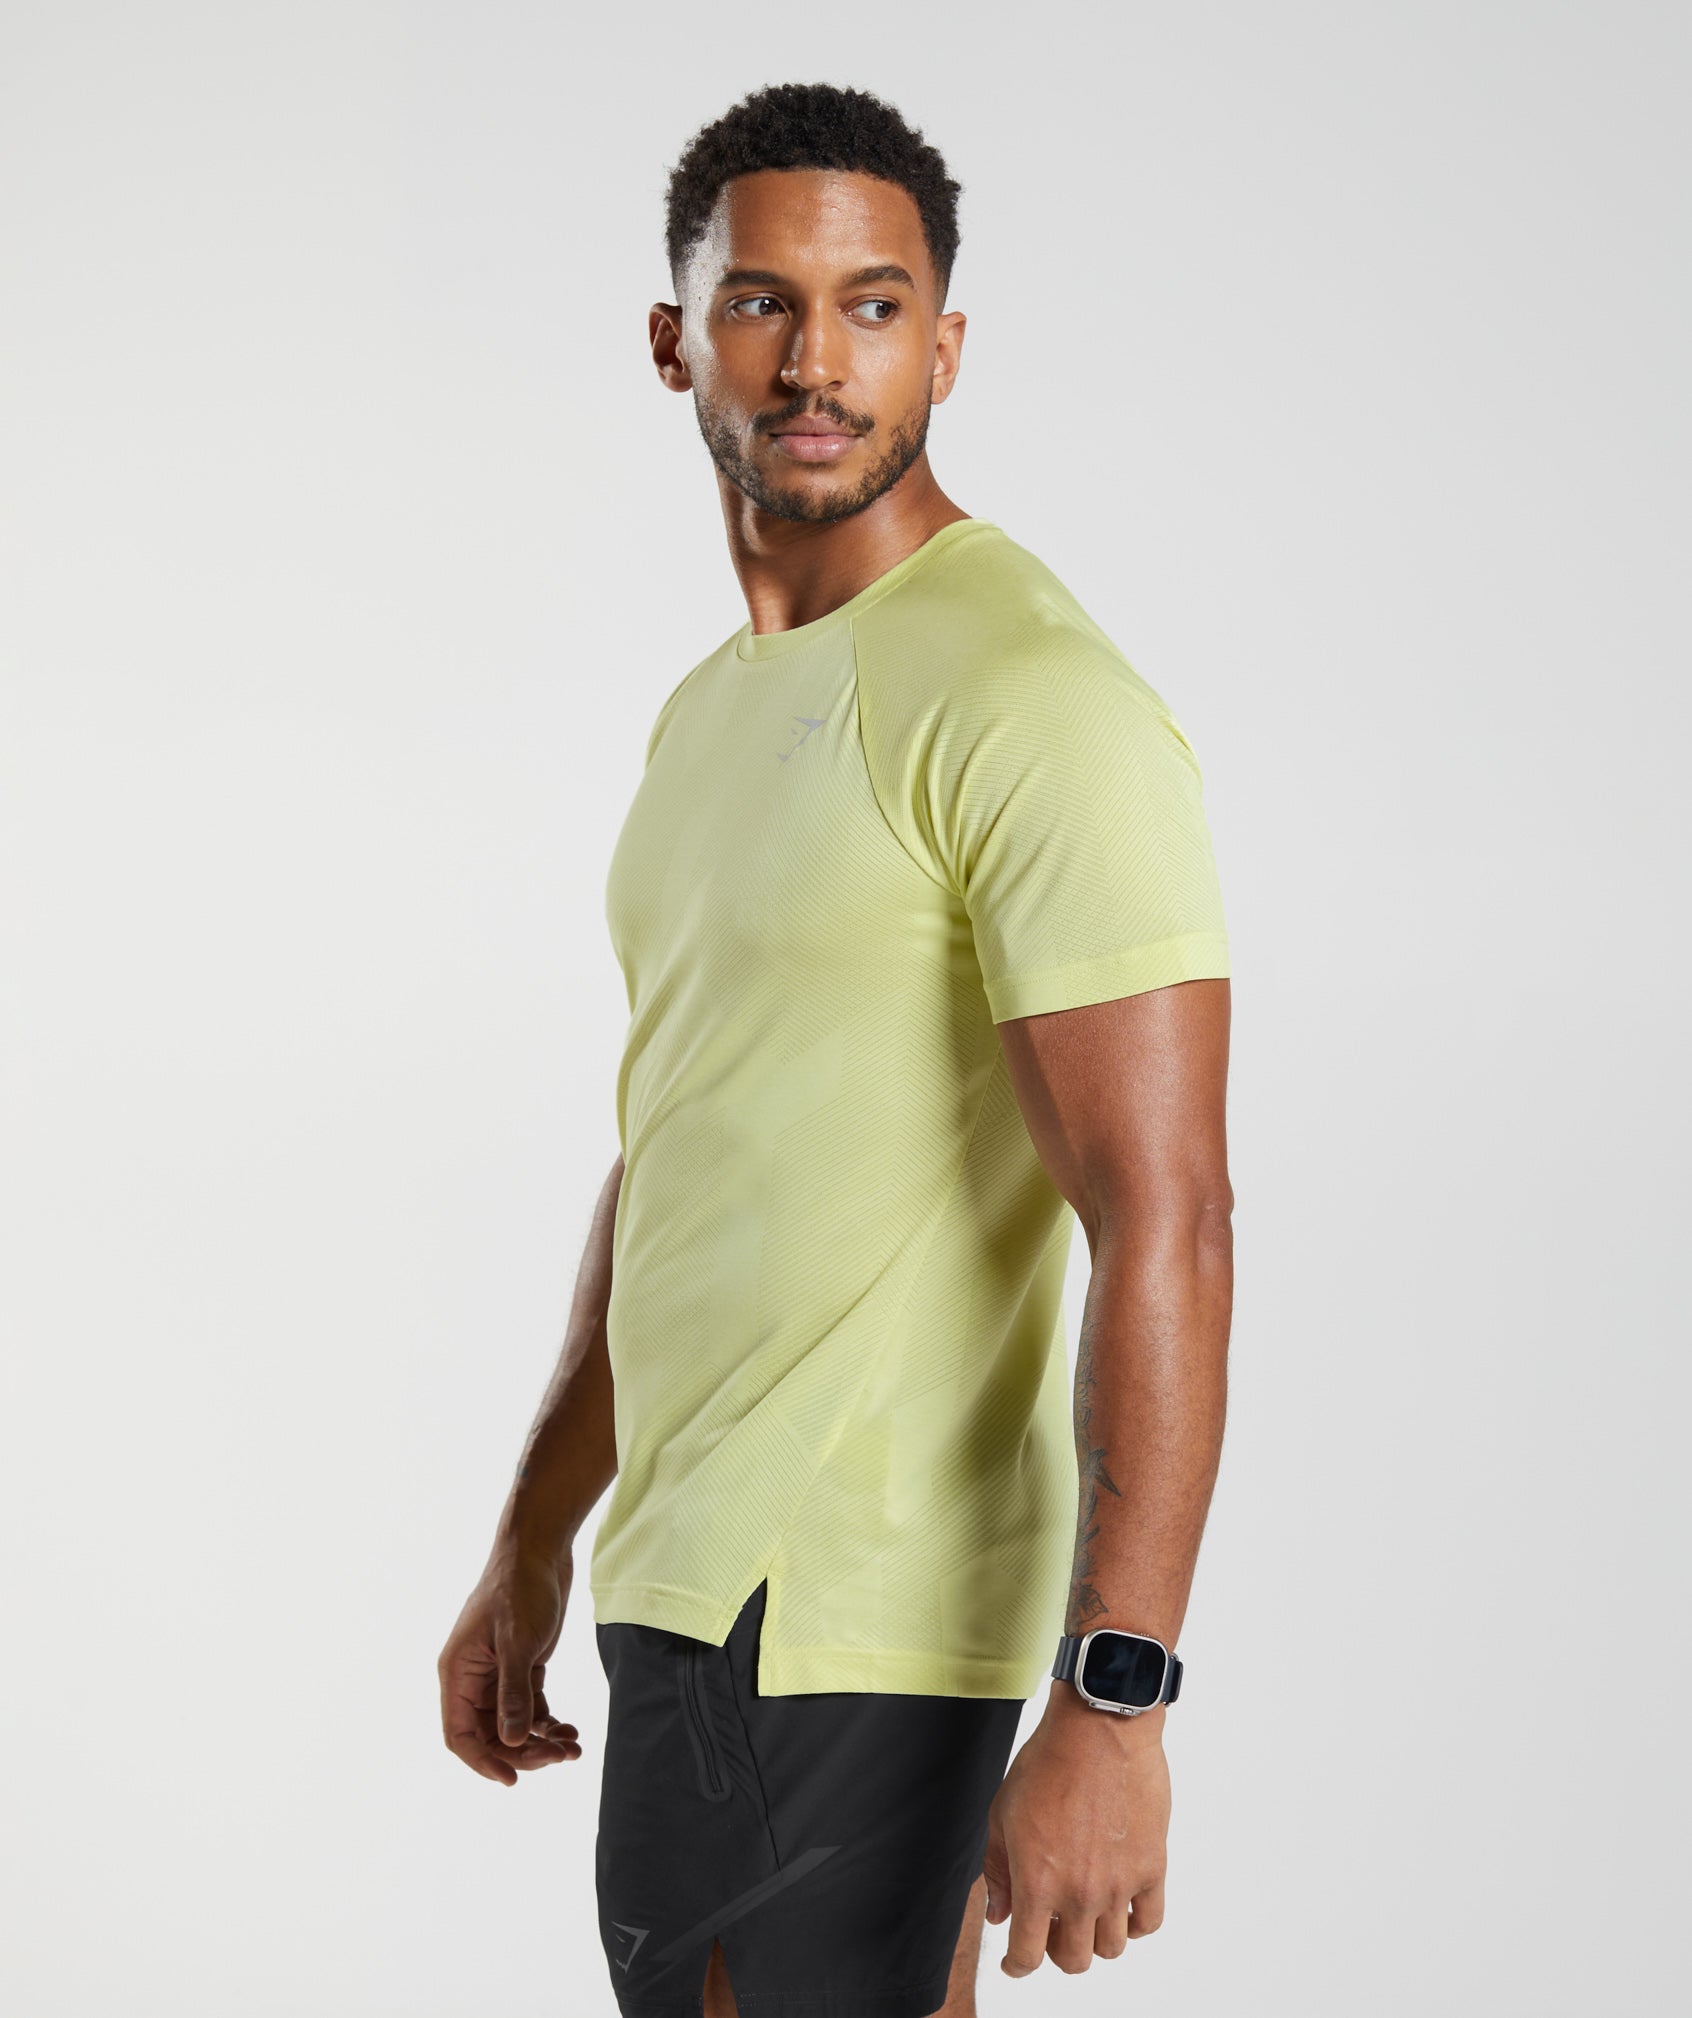 Apex T-Shirt in Firefly Green/White - view 3